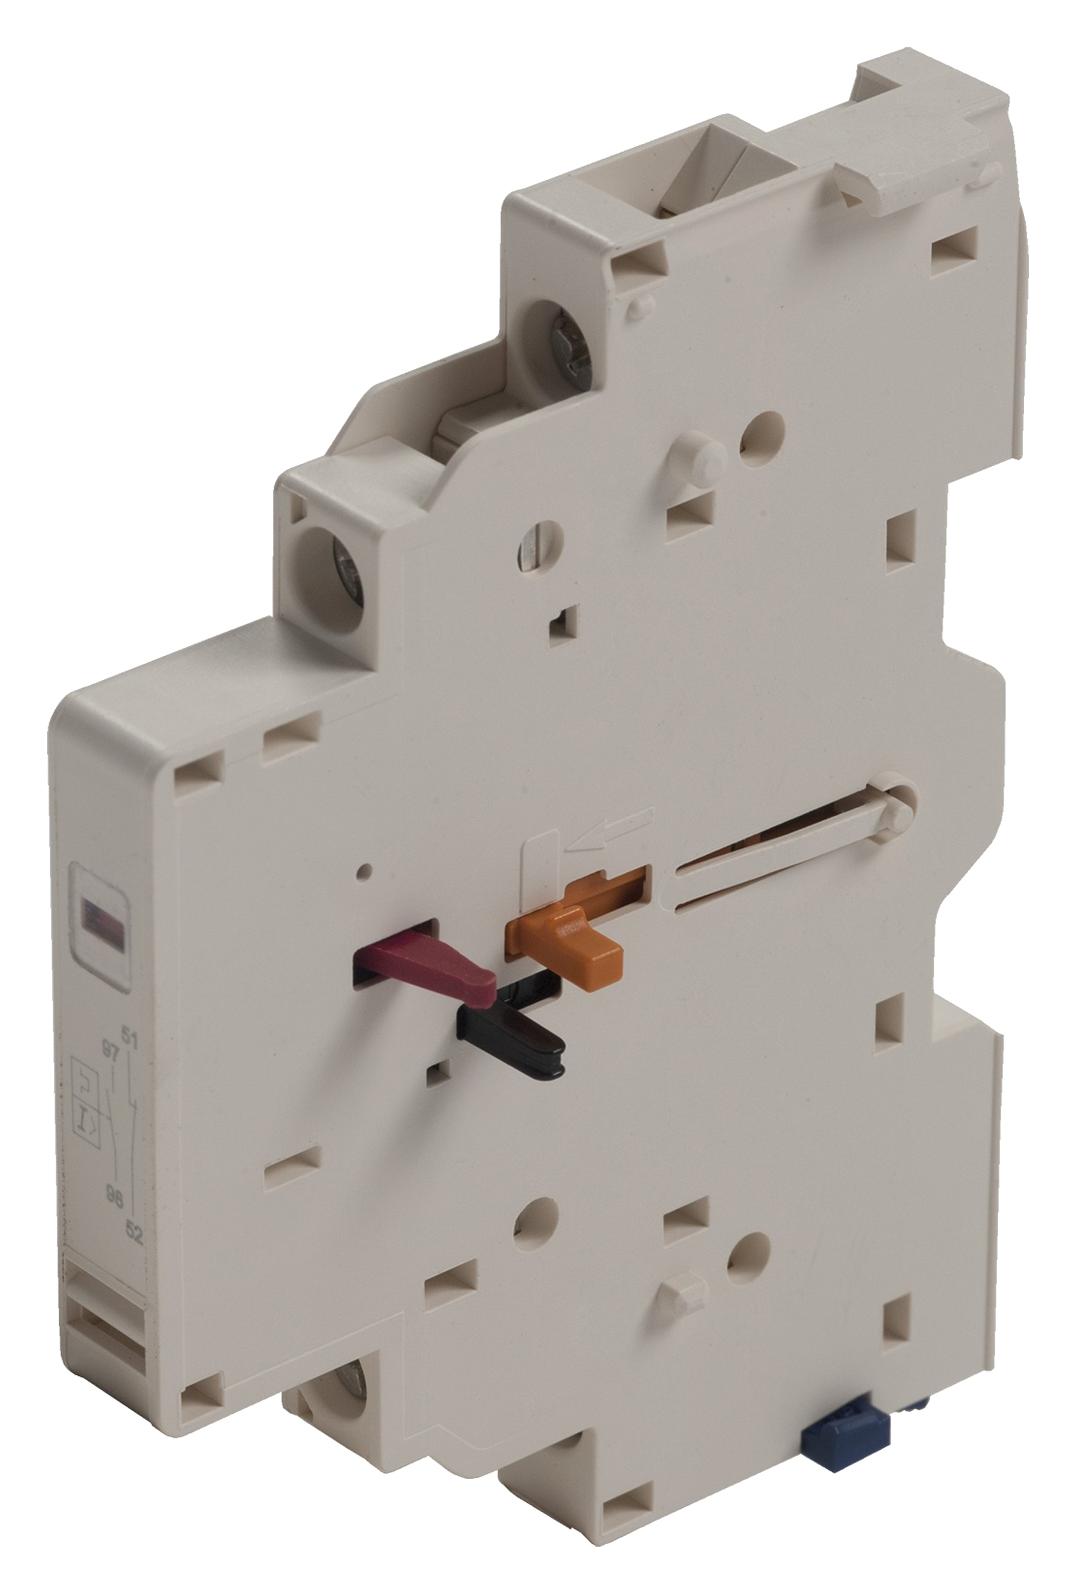 GVAD1001 AUX CONTACT BLOCK, STARTER/PROTECTOR SCHNEIDER ELECTRIC